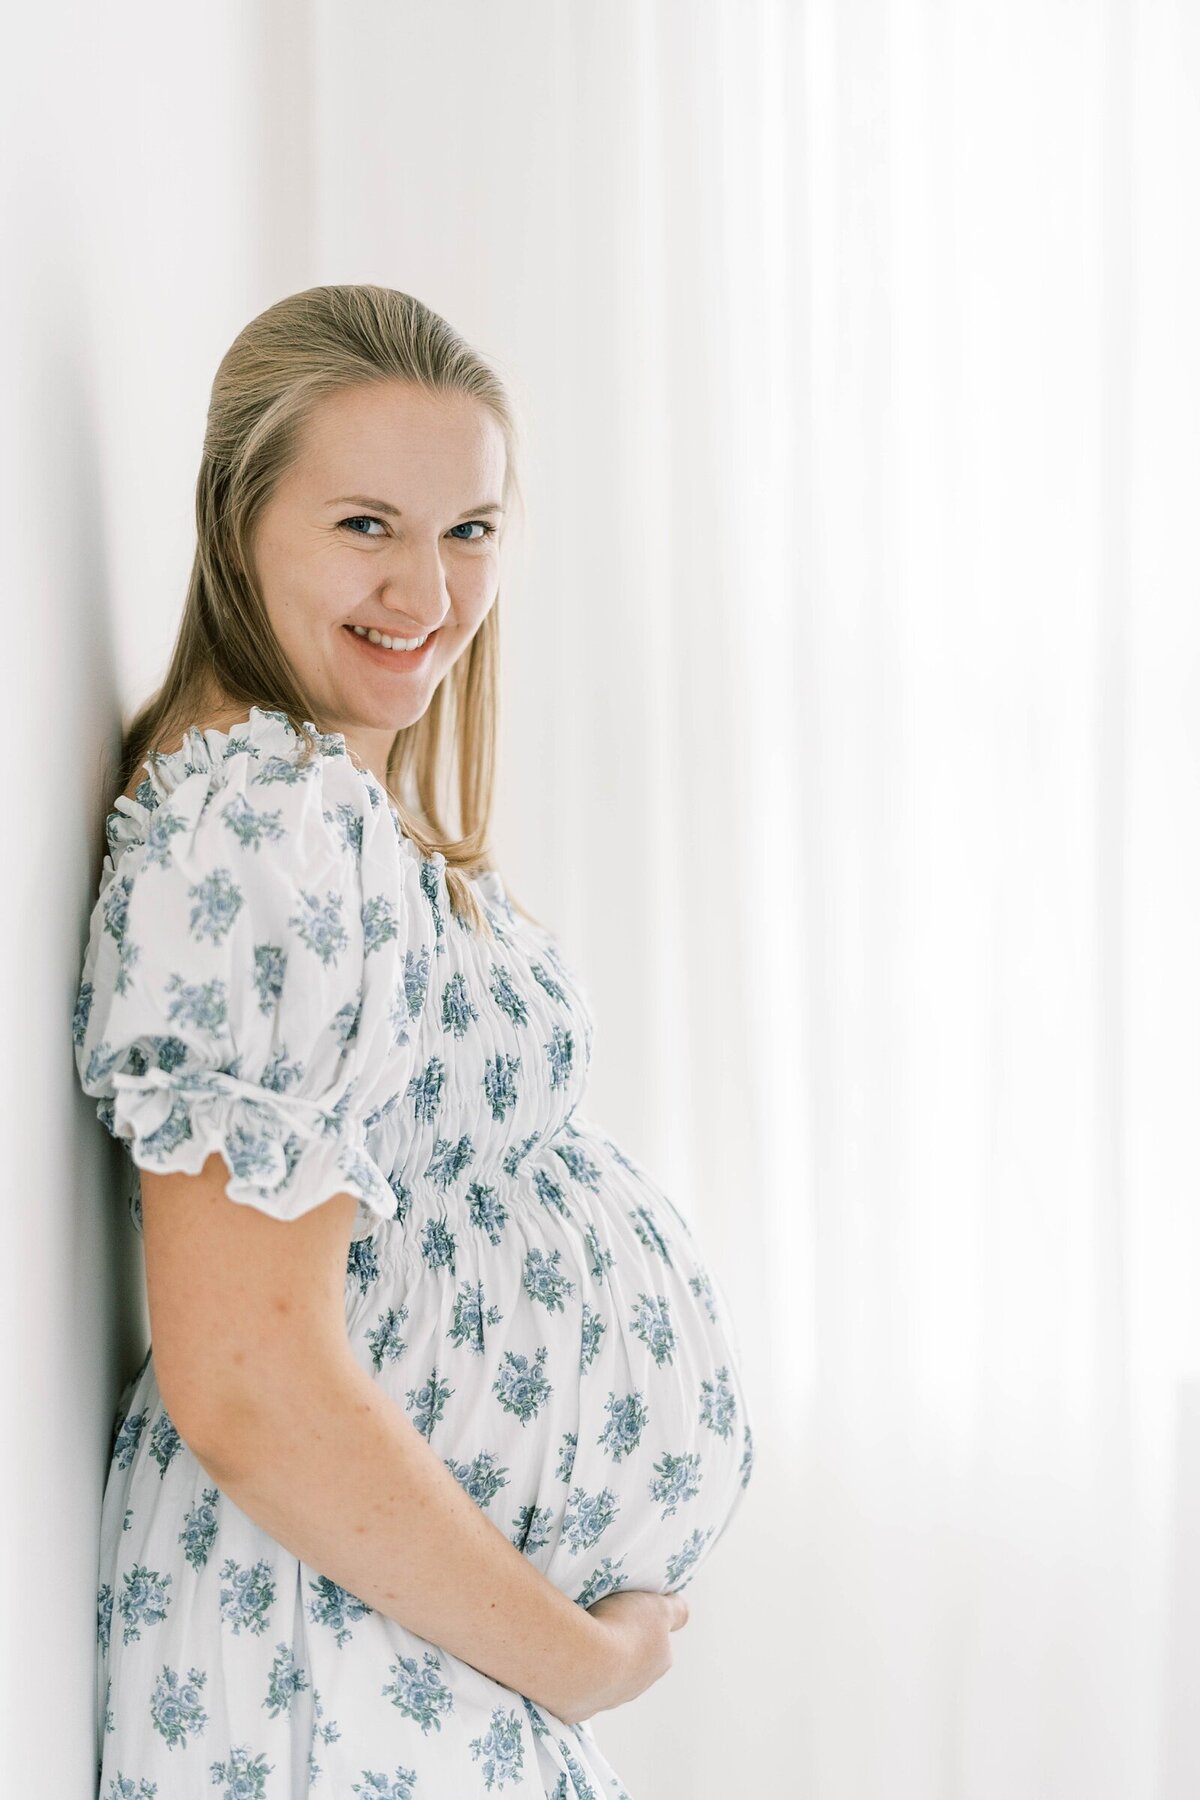 Roswell Maternity Photographer_0089